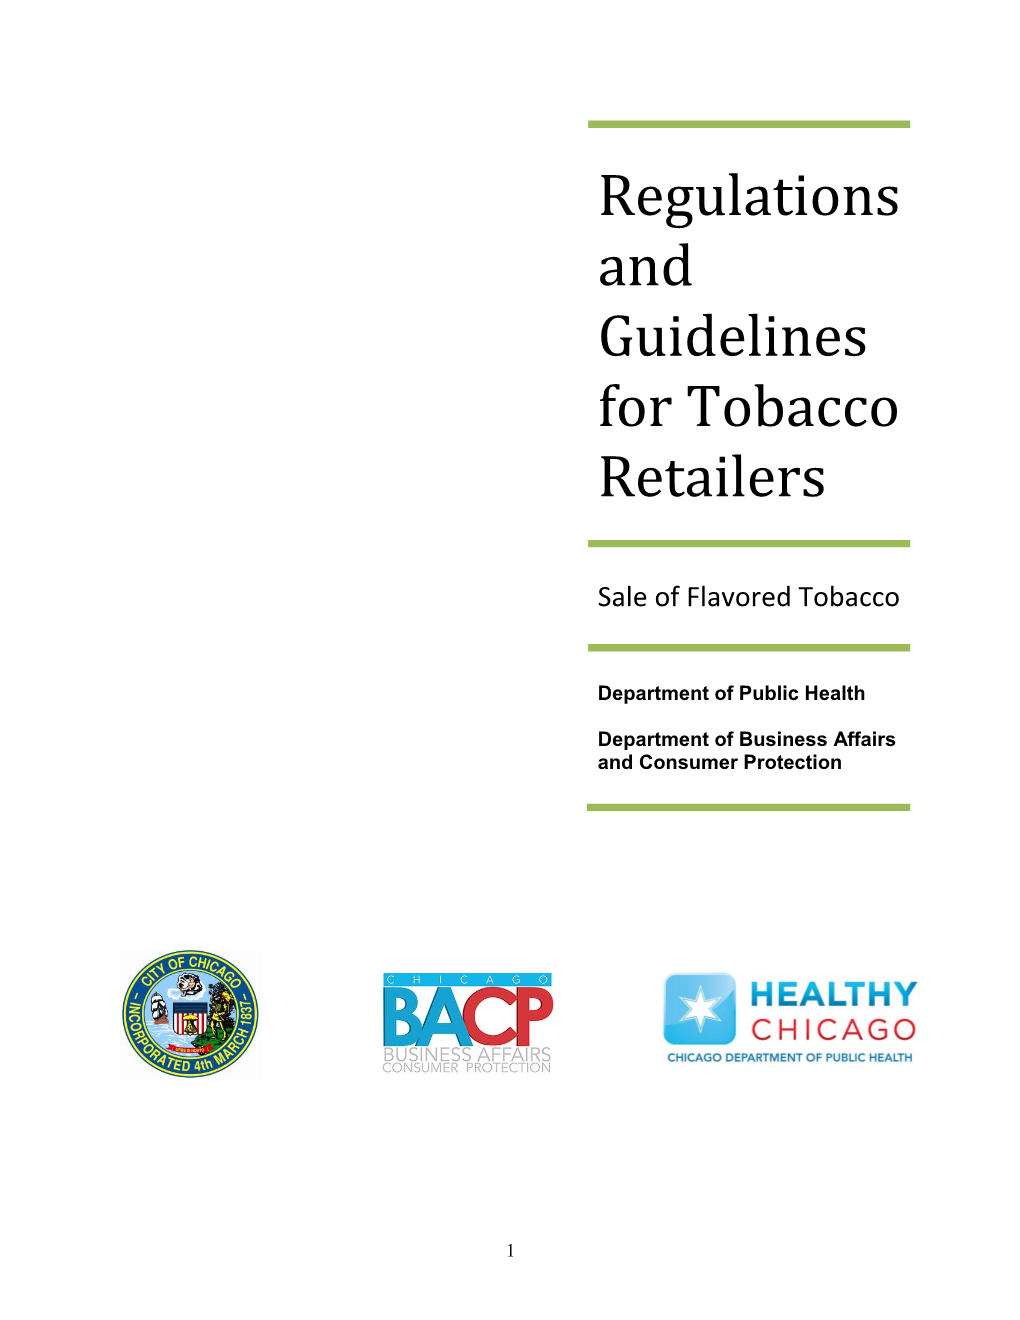 Regulations and Guidelines for Tobacco Retailers